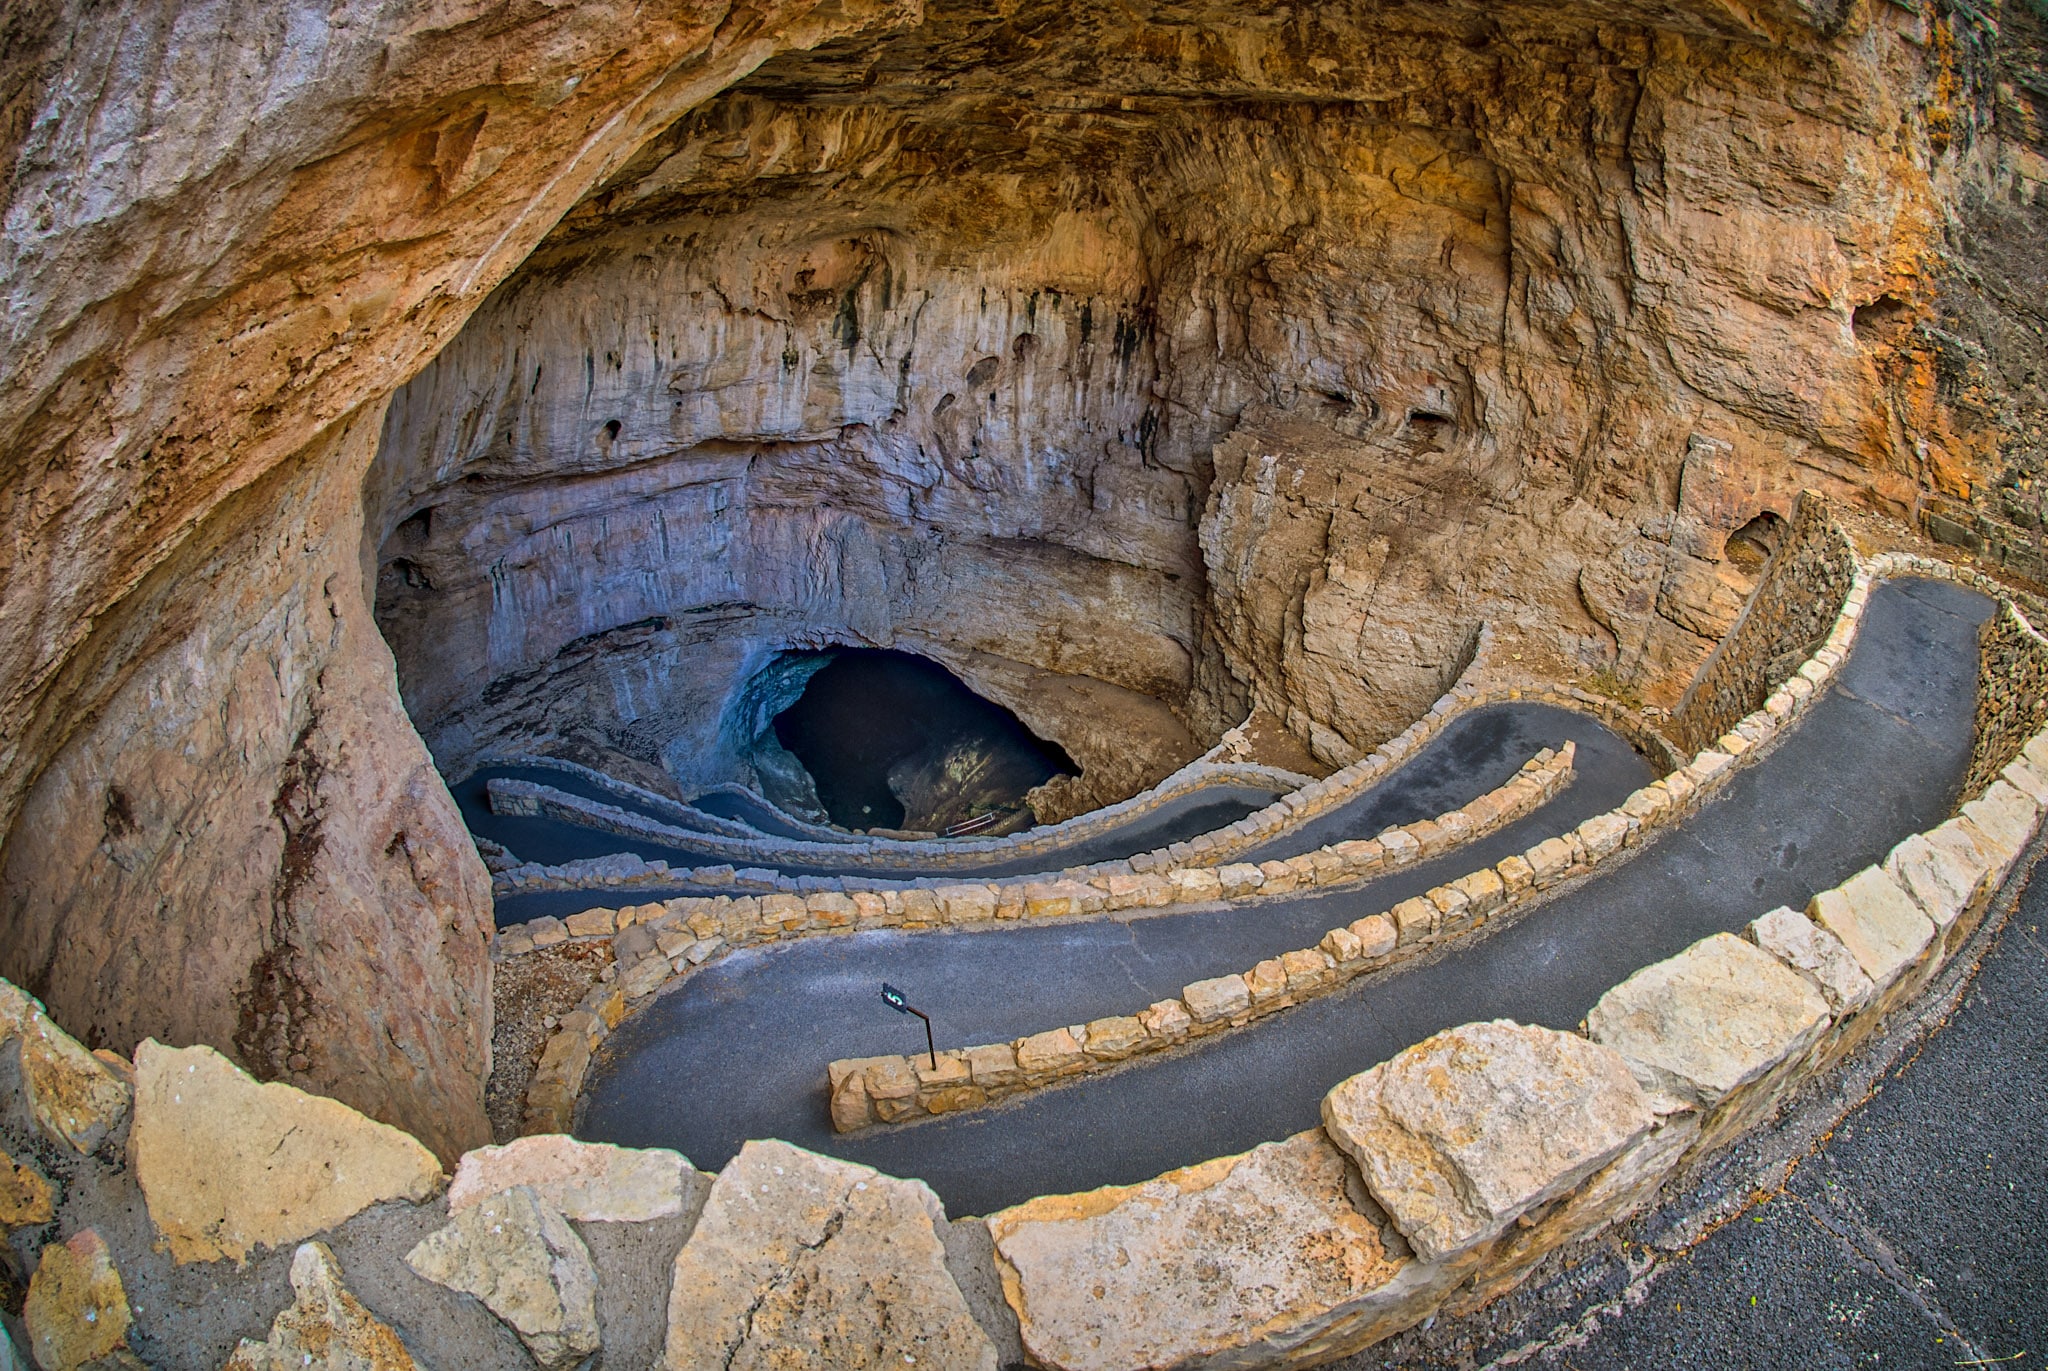 A view down the zig-zagging path to the natural entrance of Carlsbad Caverns in Carlsbad Caverns National Park, New Mexico.